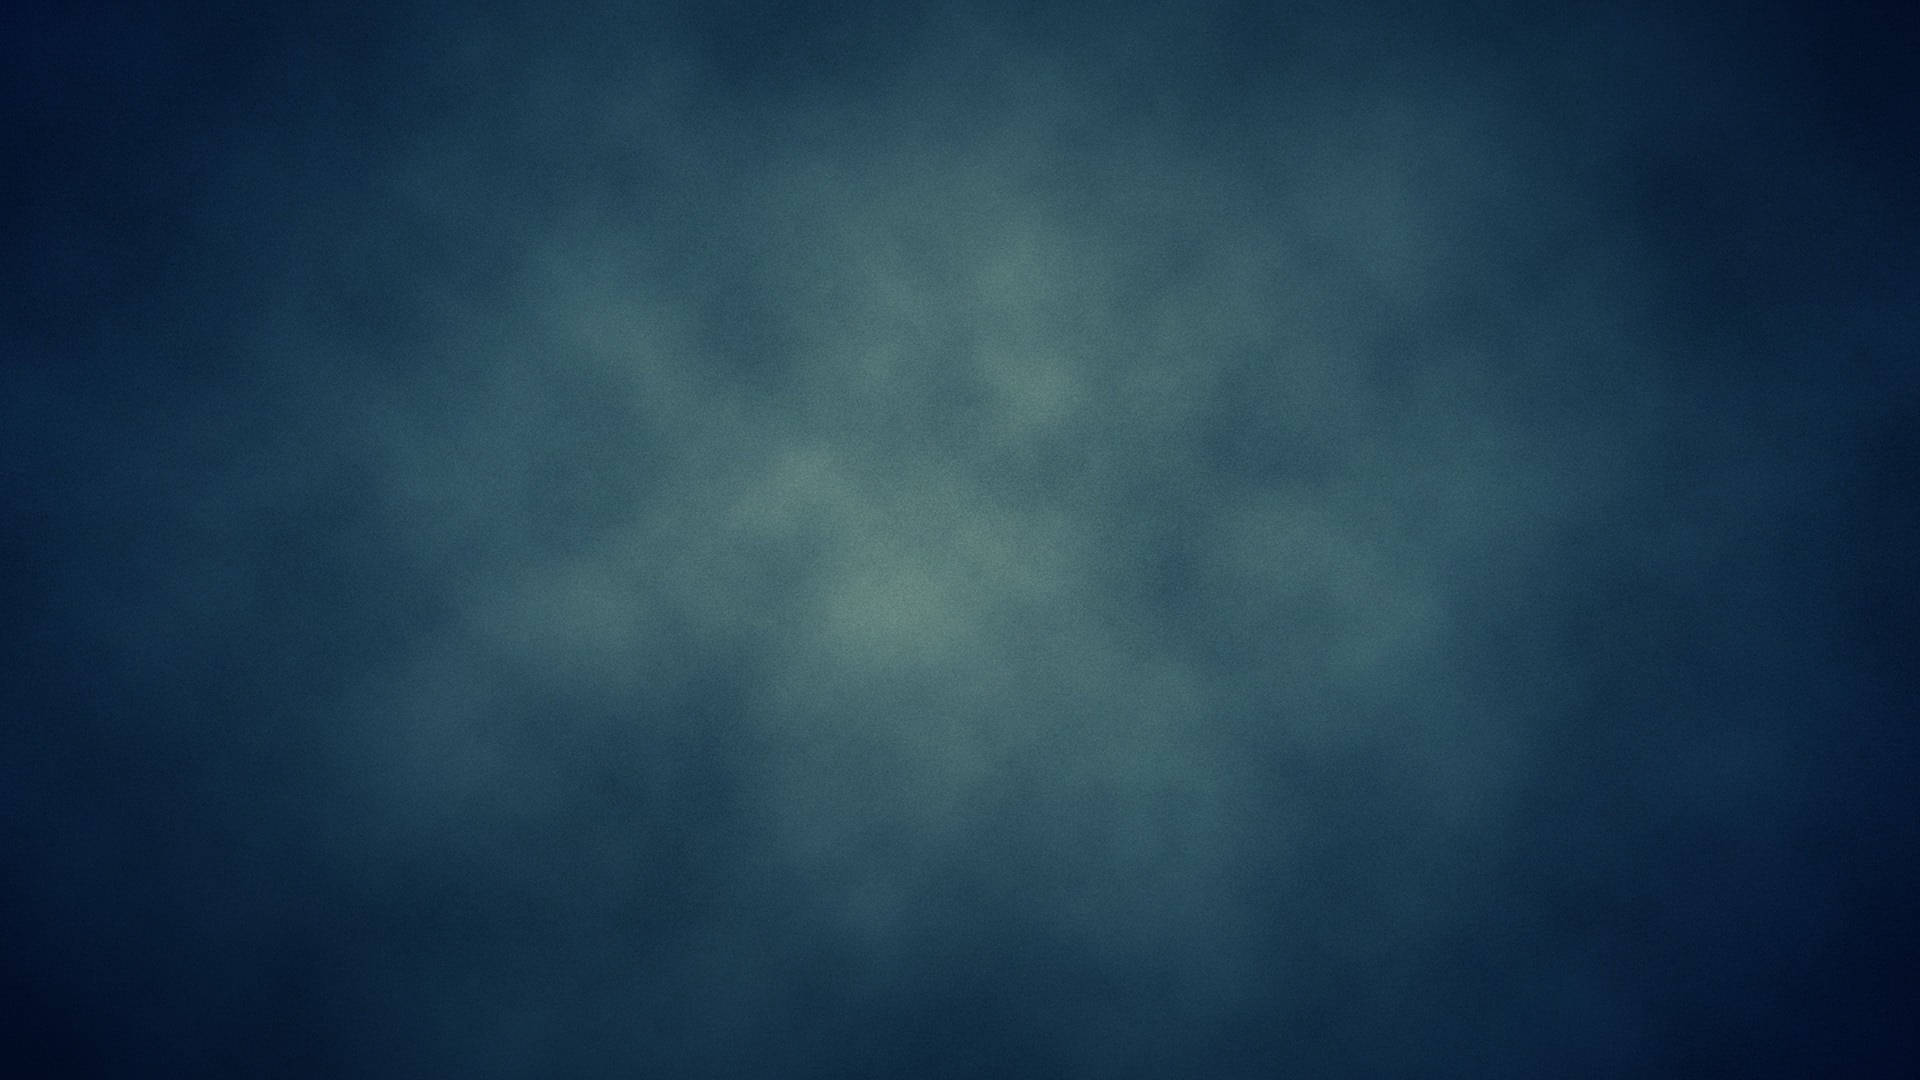 100+] Solid Blue Wallpapers